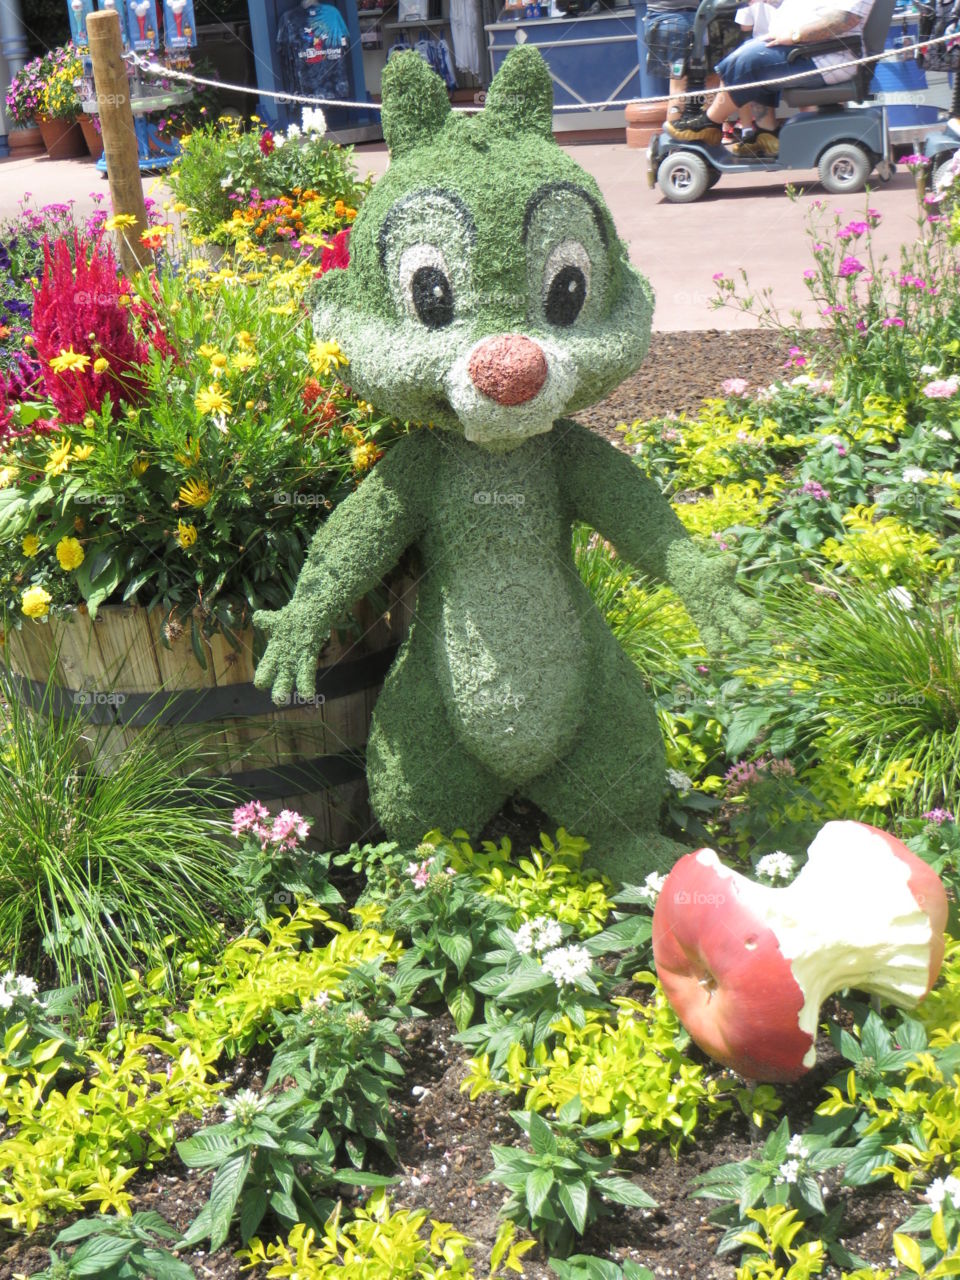 Chip and dale flower festival 